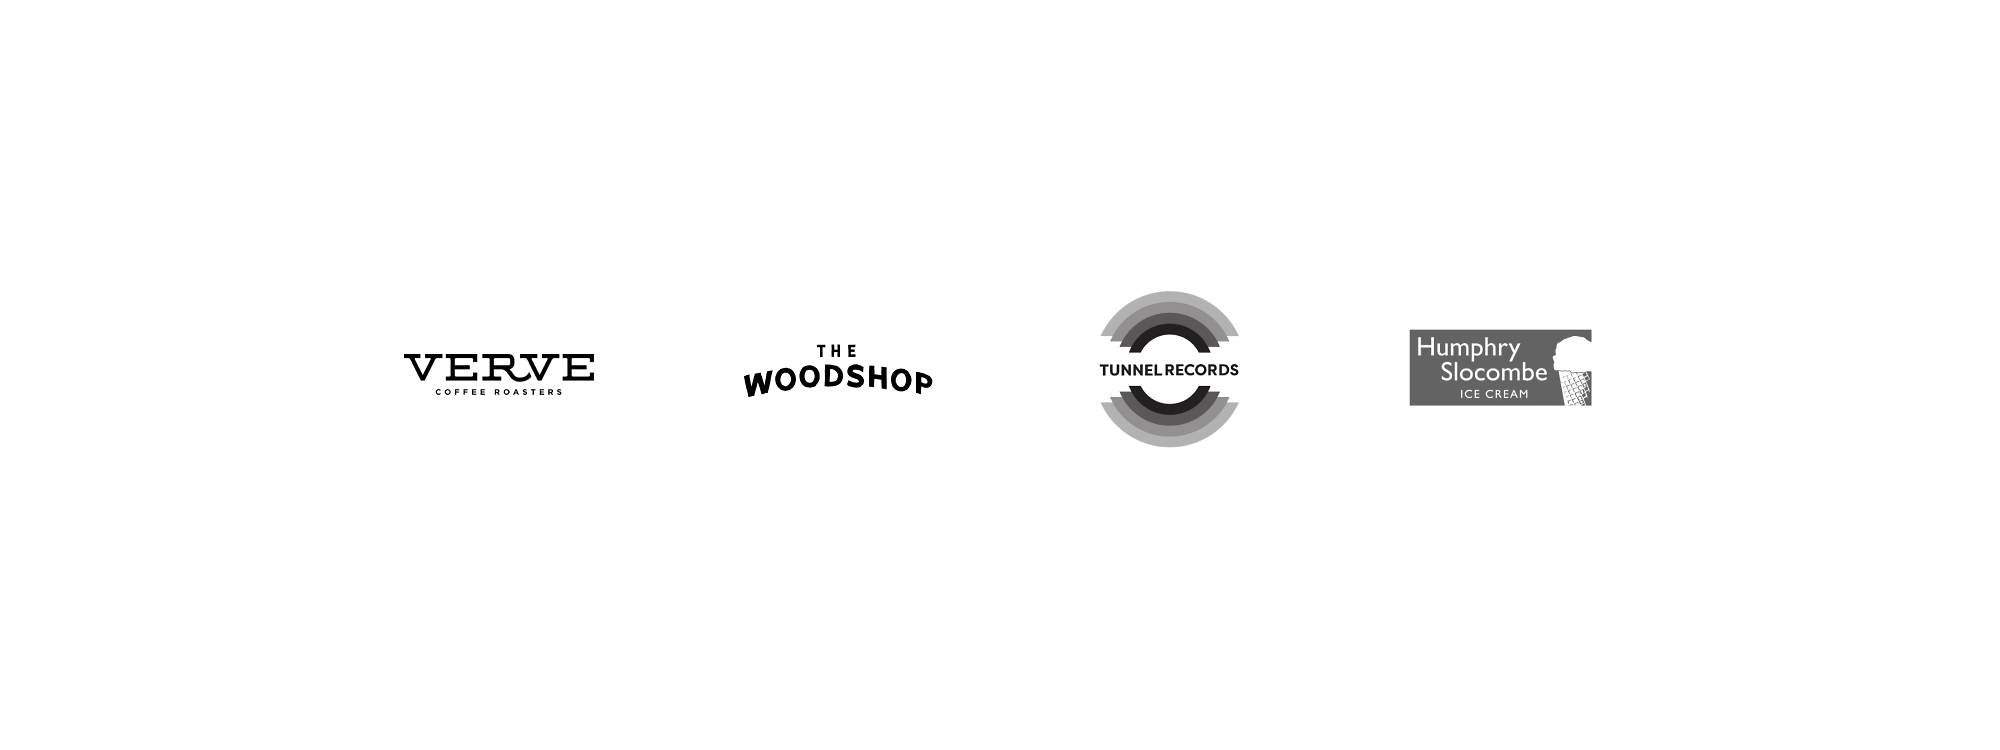 Logos of our Marketplace partners: Verve Coffee, The Woodshop, Tunnel Records, and Humphry Slocombe Ice Cream.